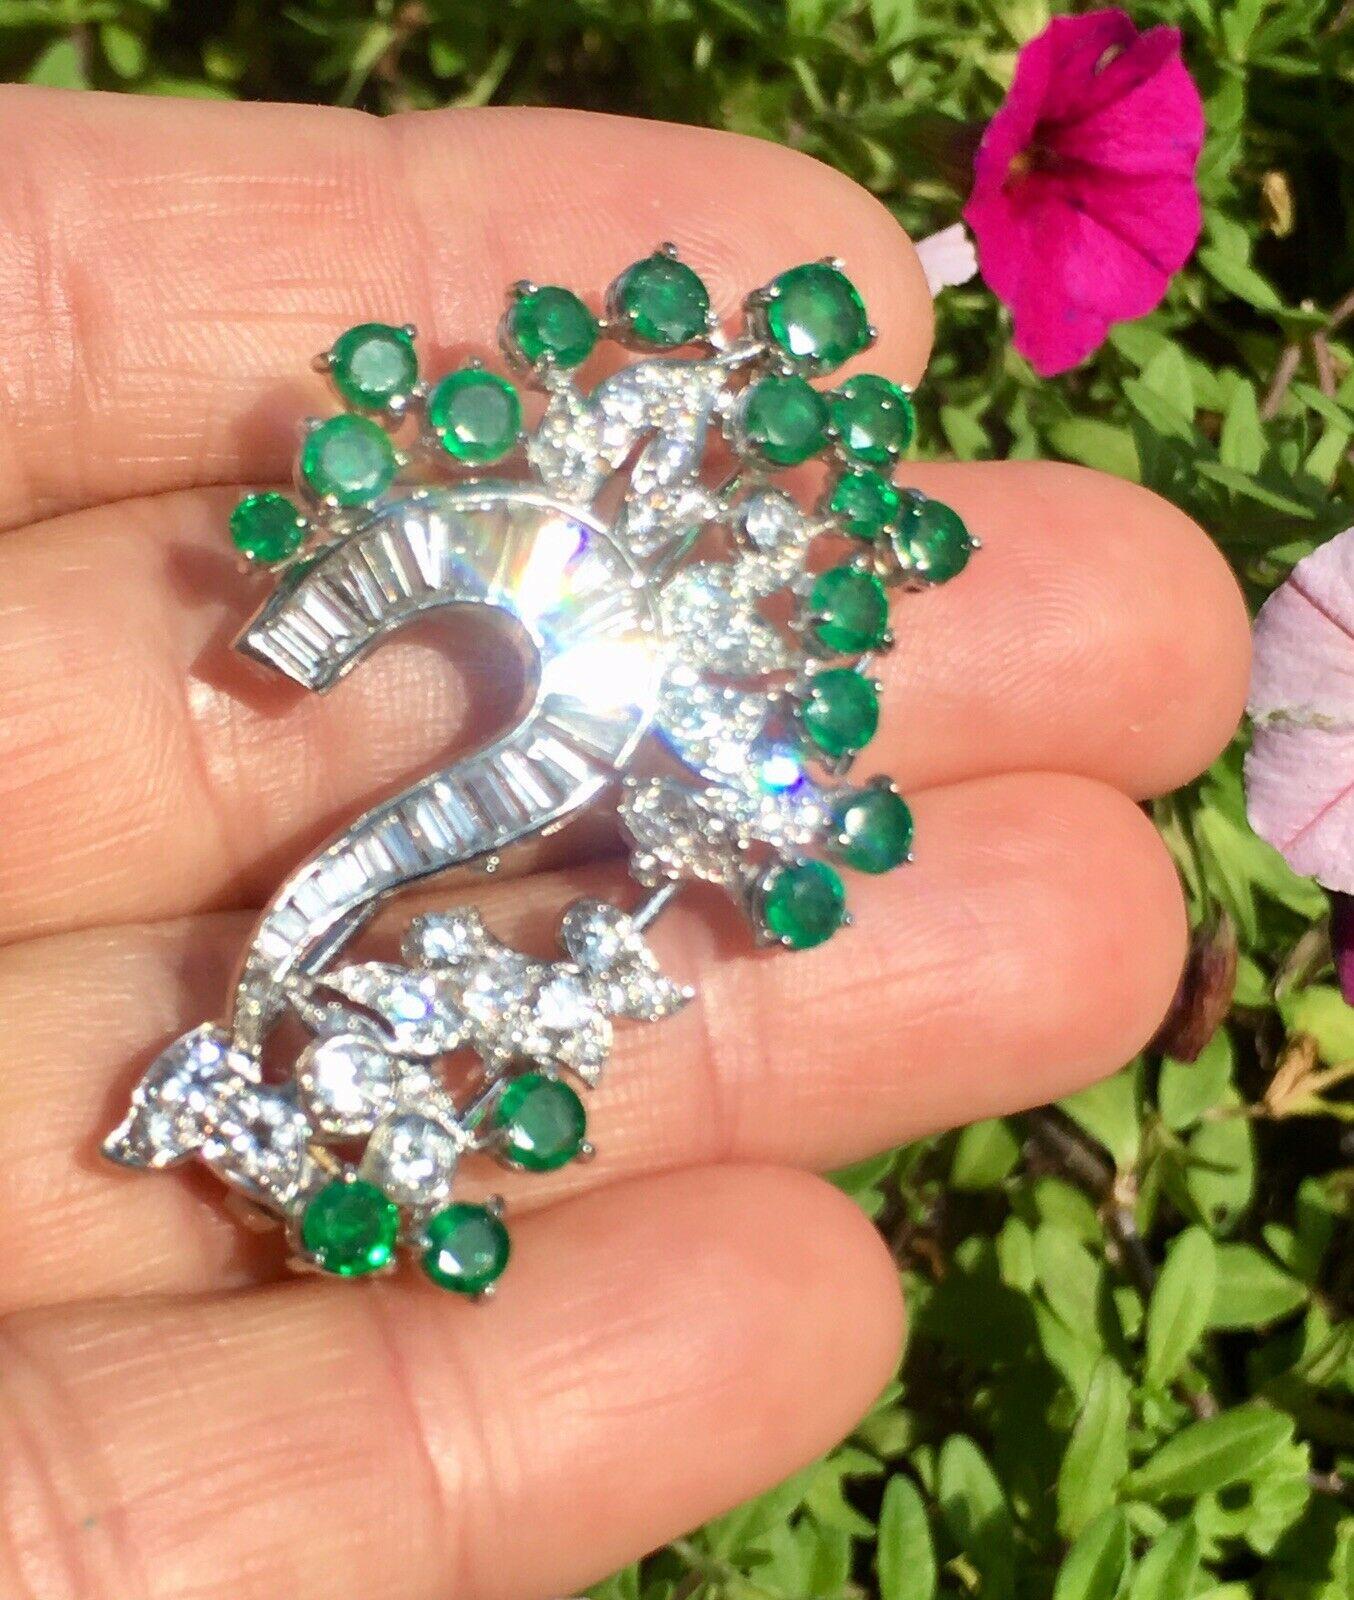 This stunning 1950s retro diamond and emerald pendant is set in platinum with 2.00 carats of beautiful G VS baguette and round brilliant diamonds. It is furthest with approximately 1.25 carats of lovely colorful sparkling emeralds.  A sizable